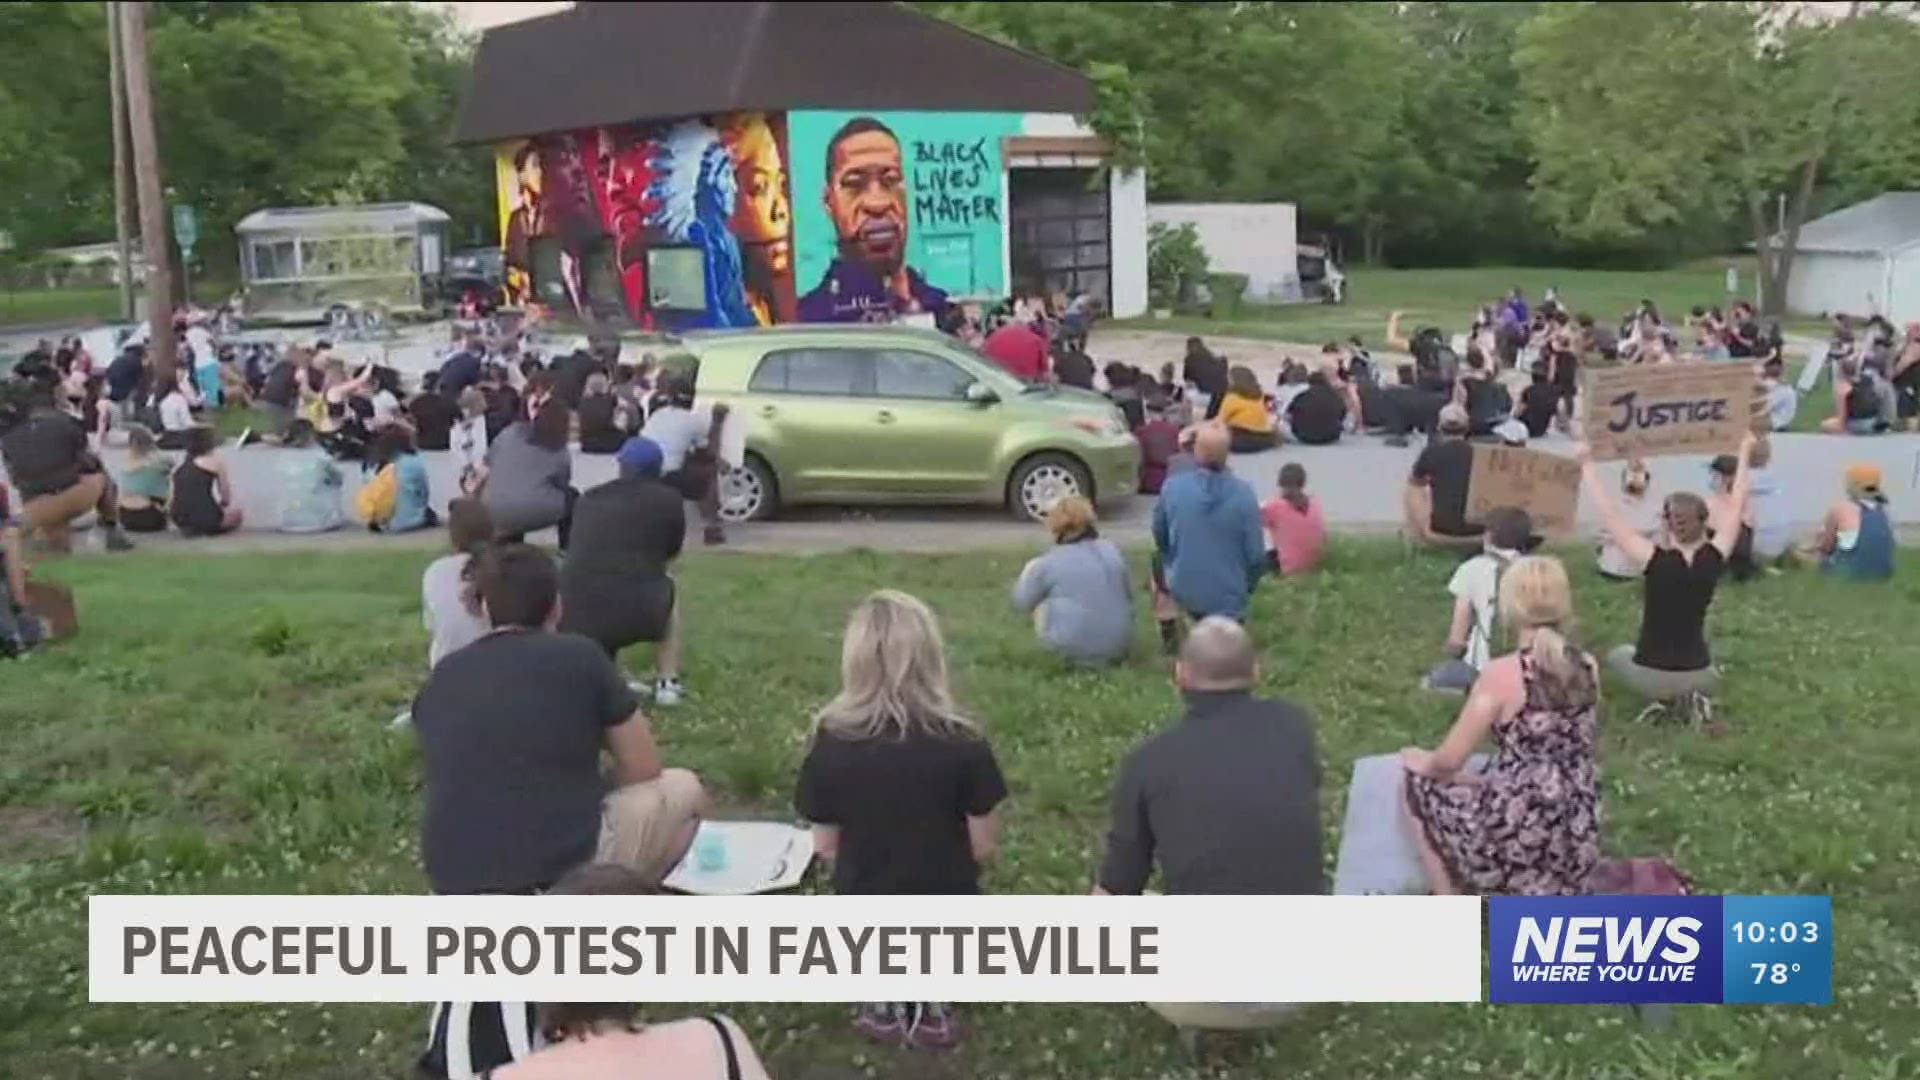 The march ended at the mural of Floyd on 7th Street in Fayetteville where protesters took a knee and sat silently together, hoping for change.